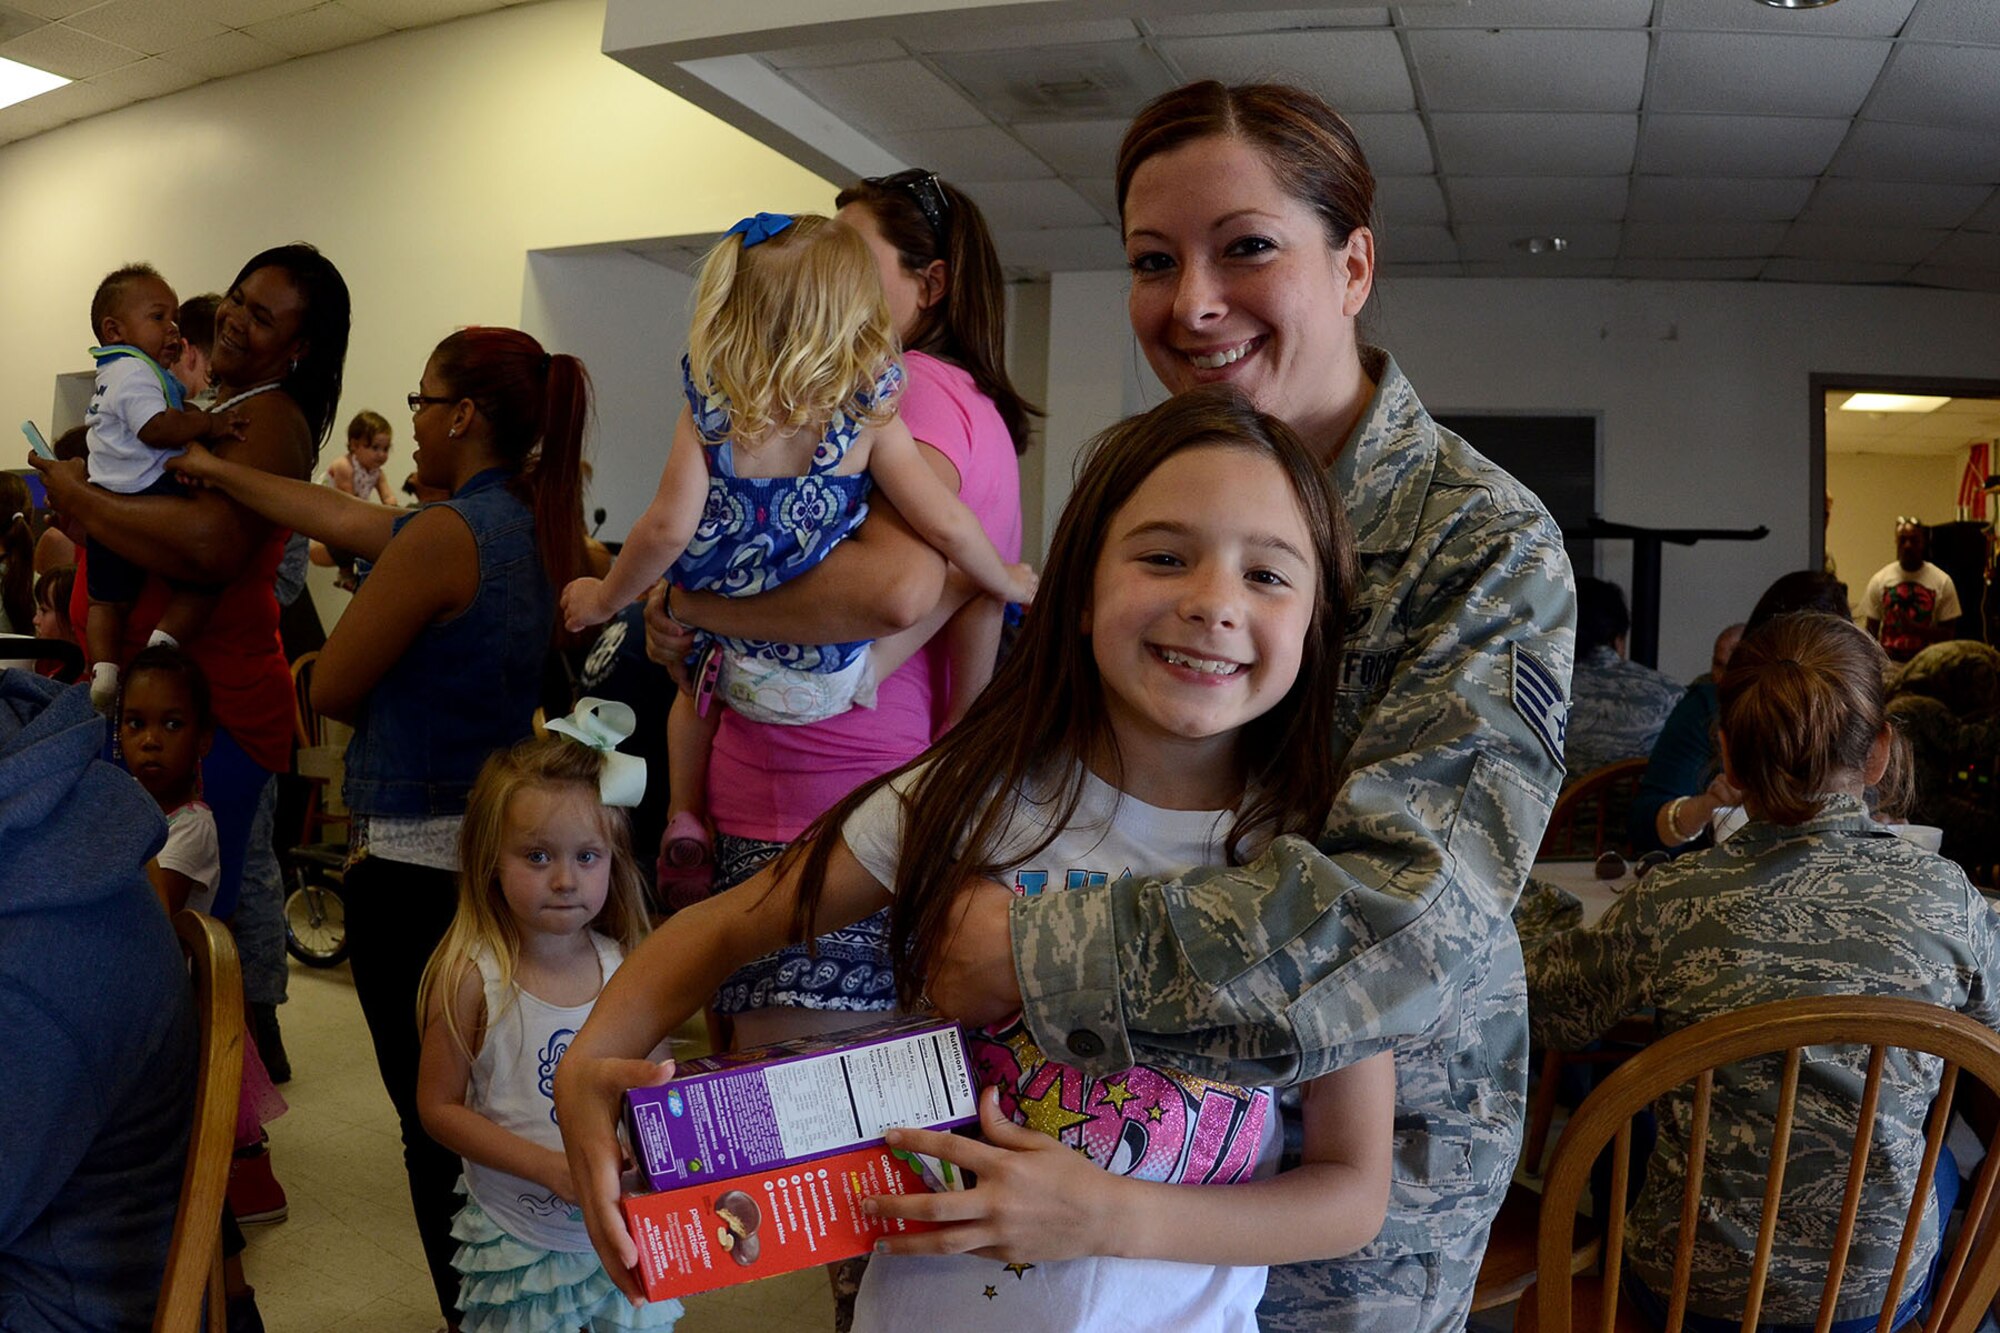 Swamp Fox Airmen and families gather during the 169th Fighter Wing Family Day for fun and fellowship at McEntire Joint National Guard Base, S.C., May 14, 2016. Local businesses and base support programs provided food and event activities to show their appreciation for the continued service of South Carolina Air National Guard and 169th Fighter Wing families and Airmen. (U.S. Air National Guard photo by Senior Airman Ashleigh S. Pavelek)